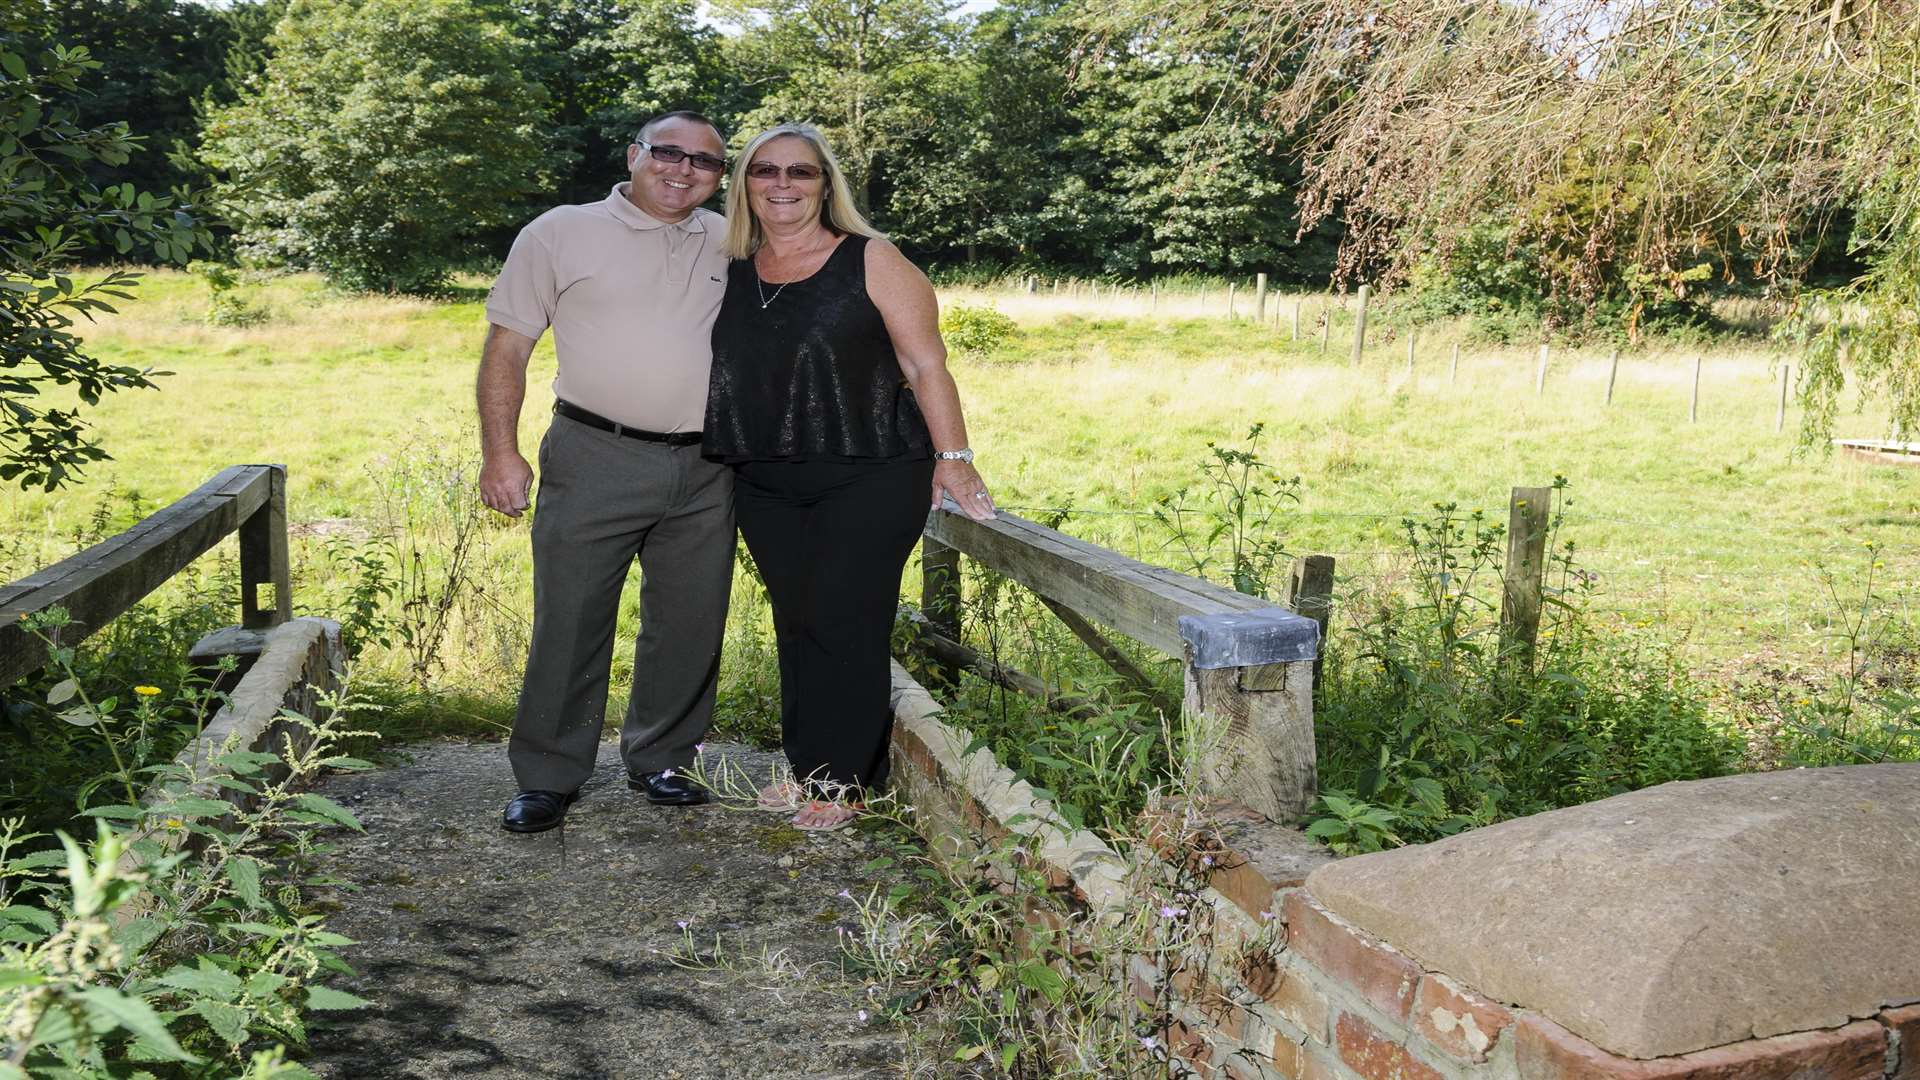 Paul and Lorraine have bought an old equestrian centre